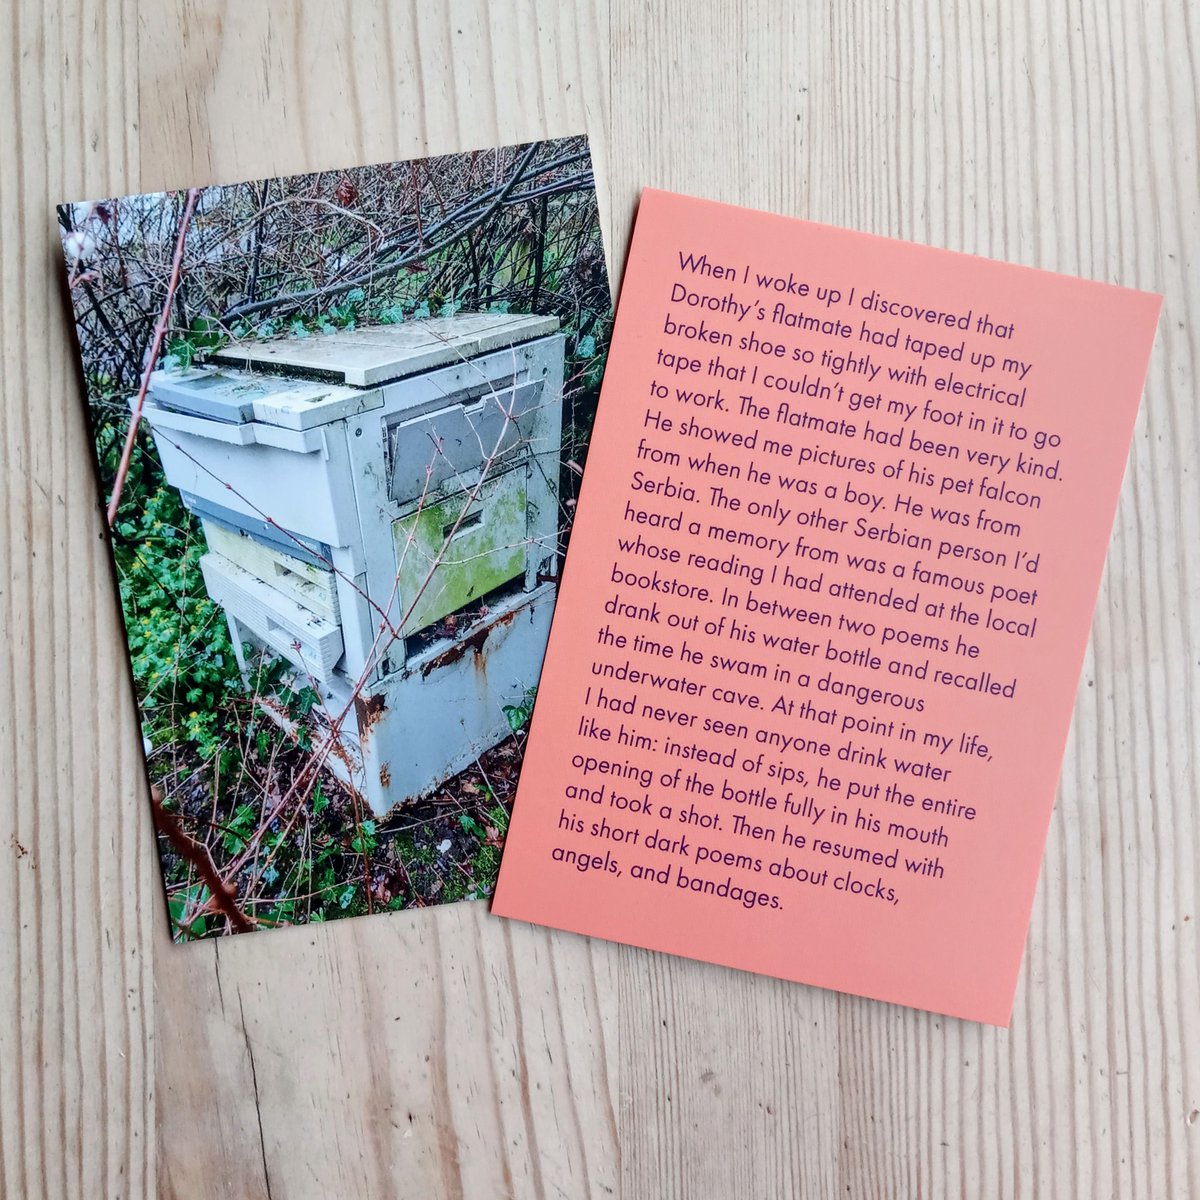 A new Oo poem-postcard pair launches today! We have: 👉Lila Matsumoto's prose-card *your dangerous shoe* 👉Jeff Hilson's photo of Bob Cobbing's rewilded photocopier (in Hugh Metcalfe's garden). £7.50 the pair incl. postage or £5 each Buy here or DM me oo-press.com/postcard-poems